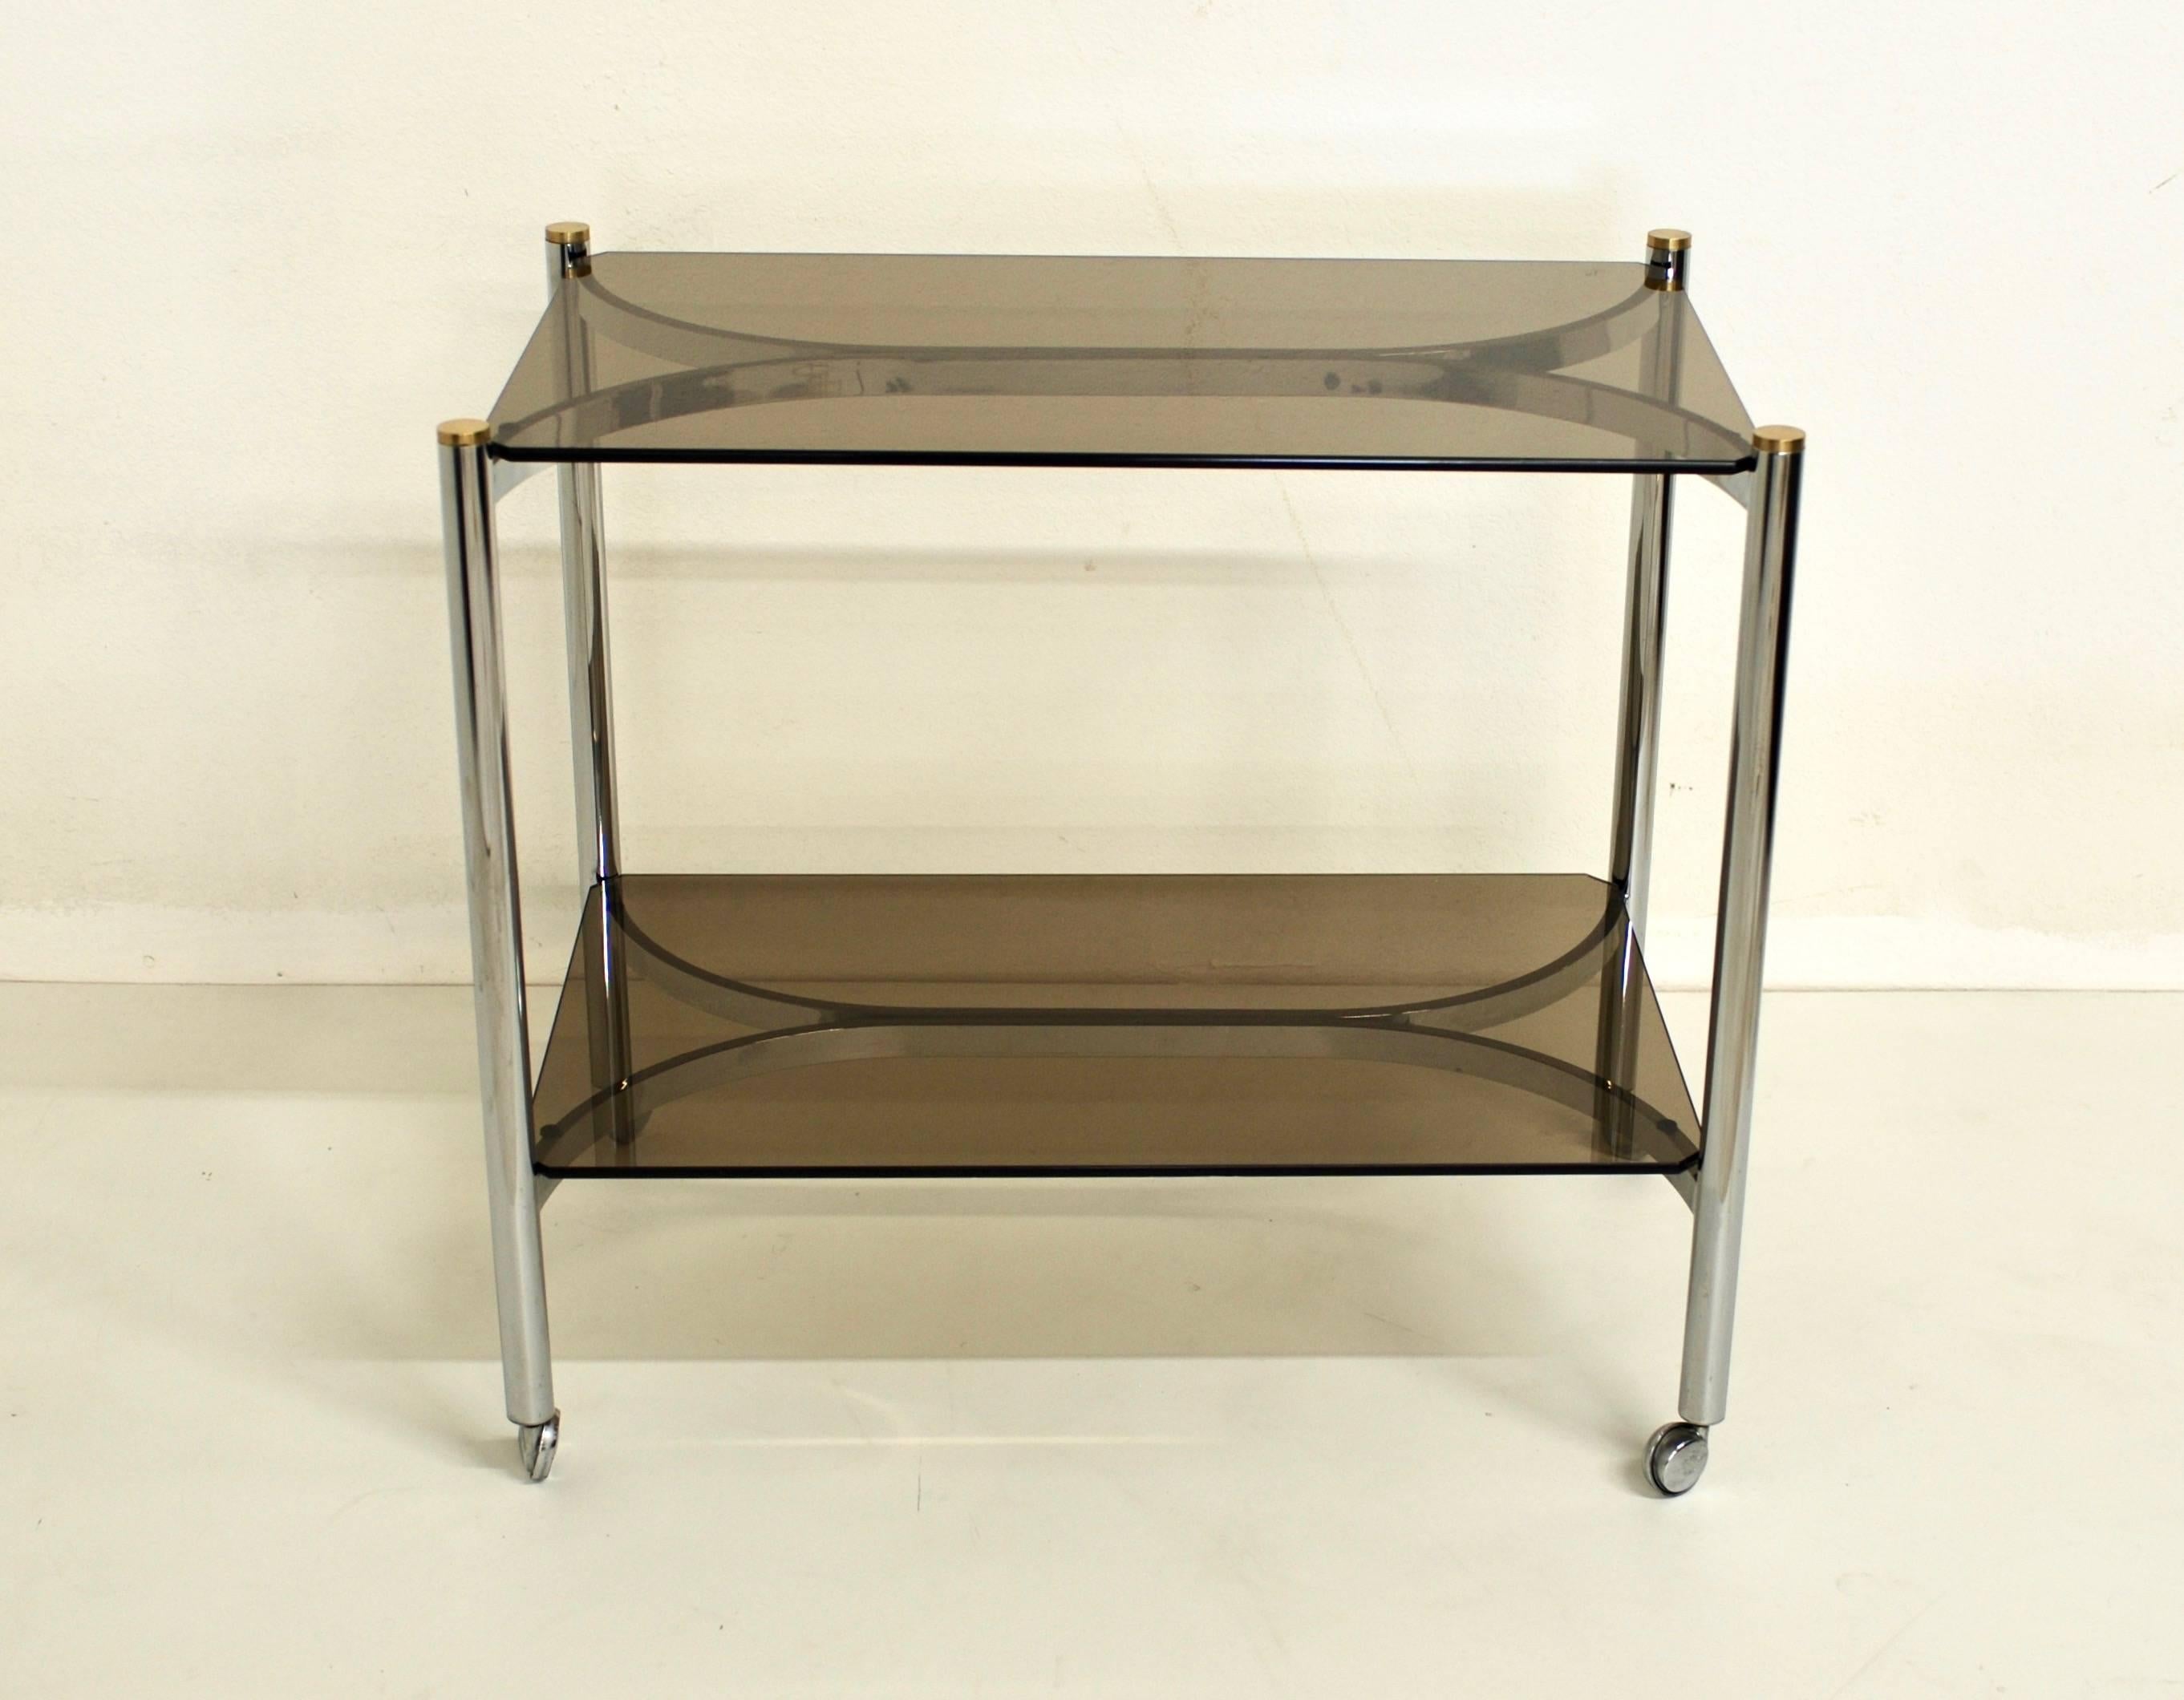 A mixed metal chrome 1970s era bar cart with brass caps and bronze colored glass. It rests on metal casters. The design of the cart has nice clean lines.